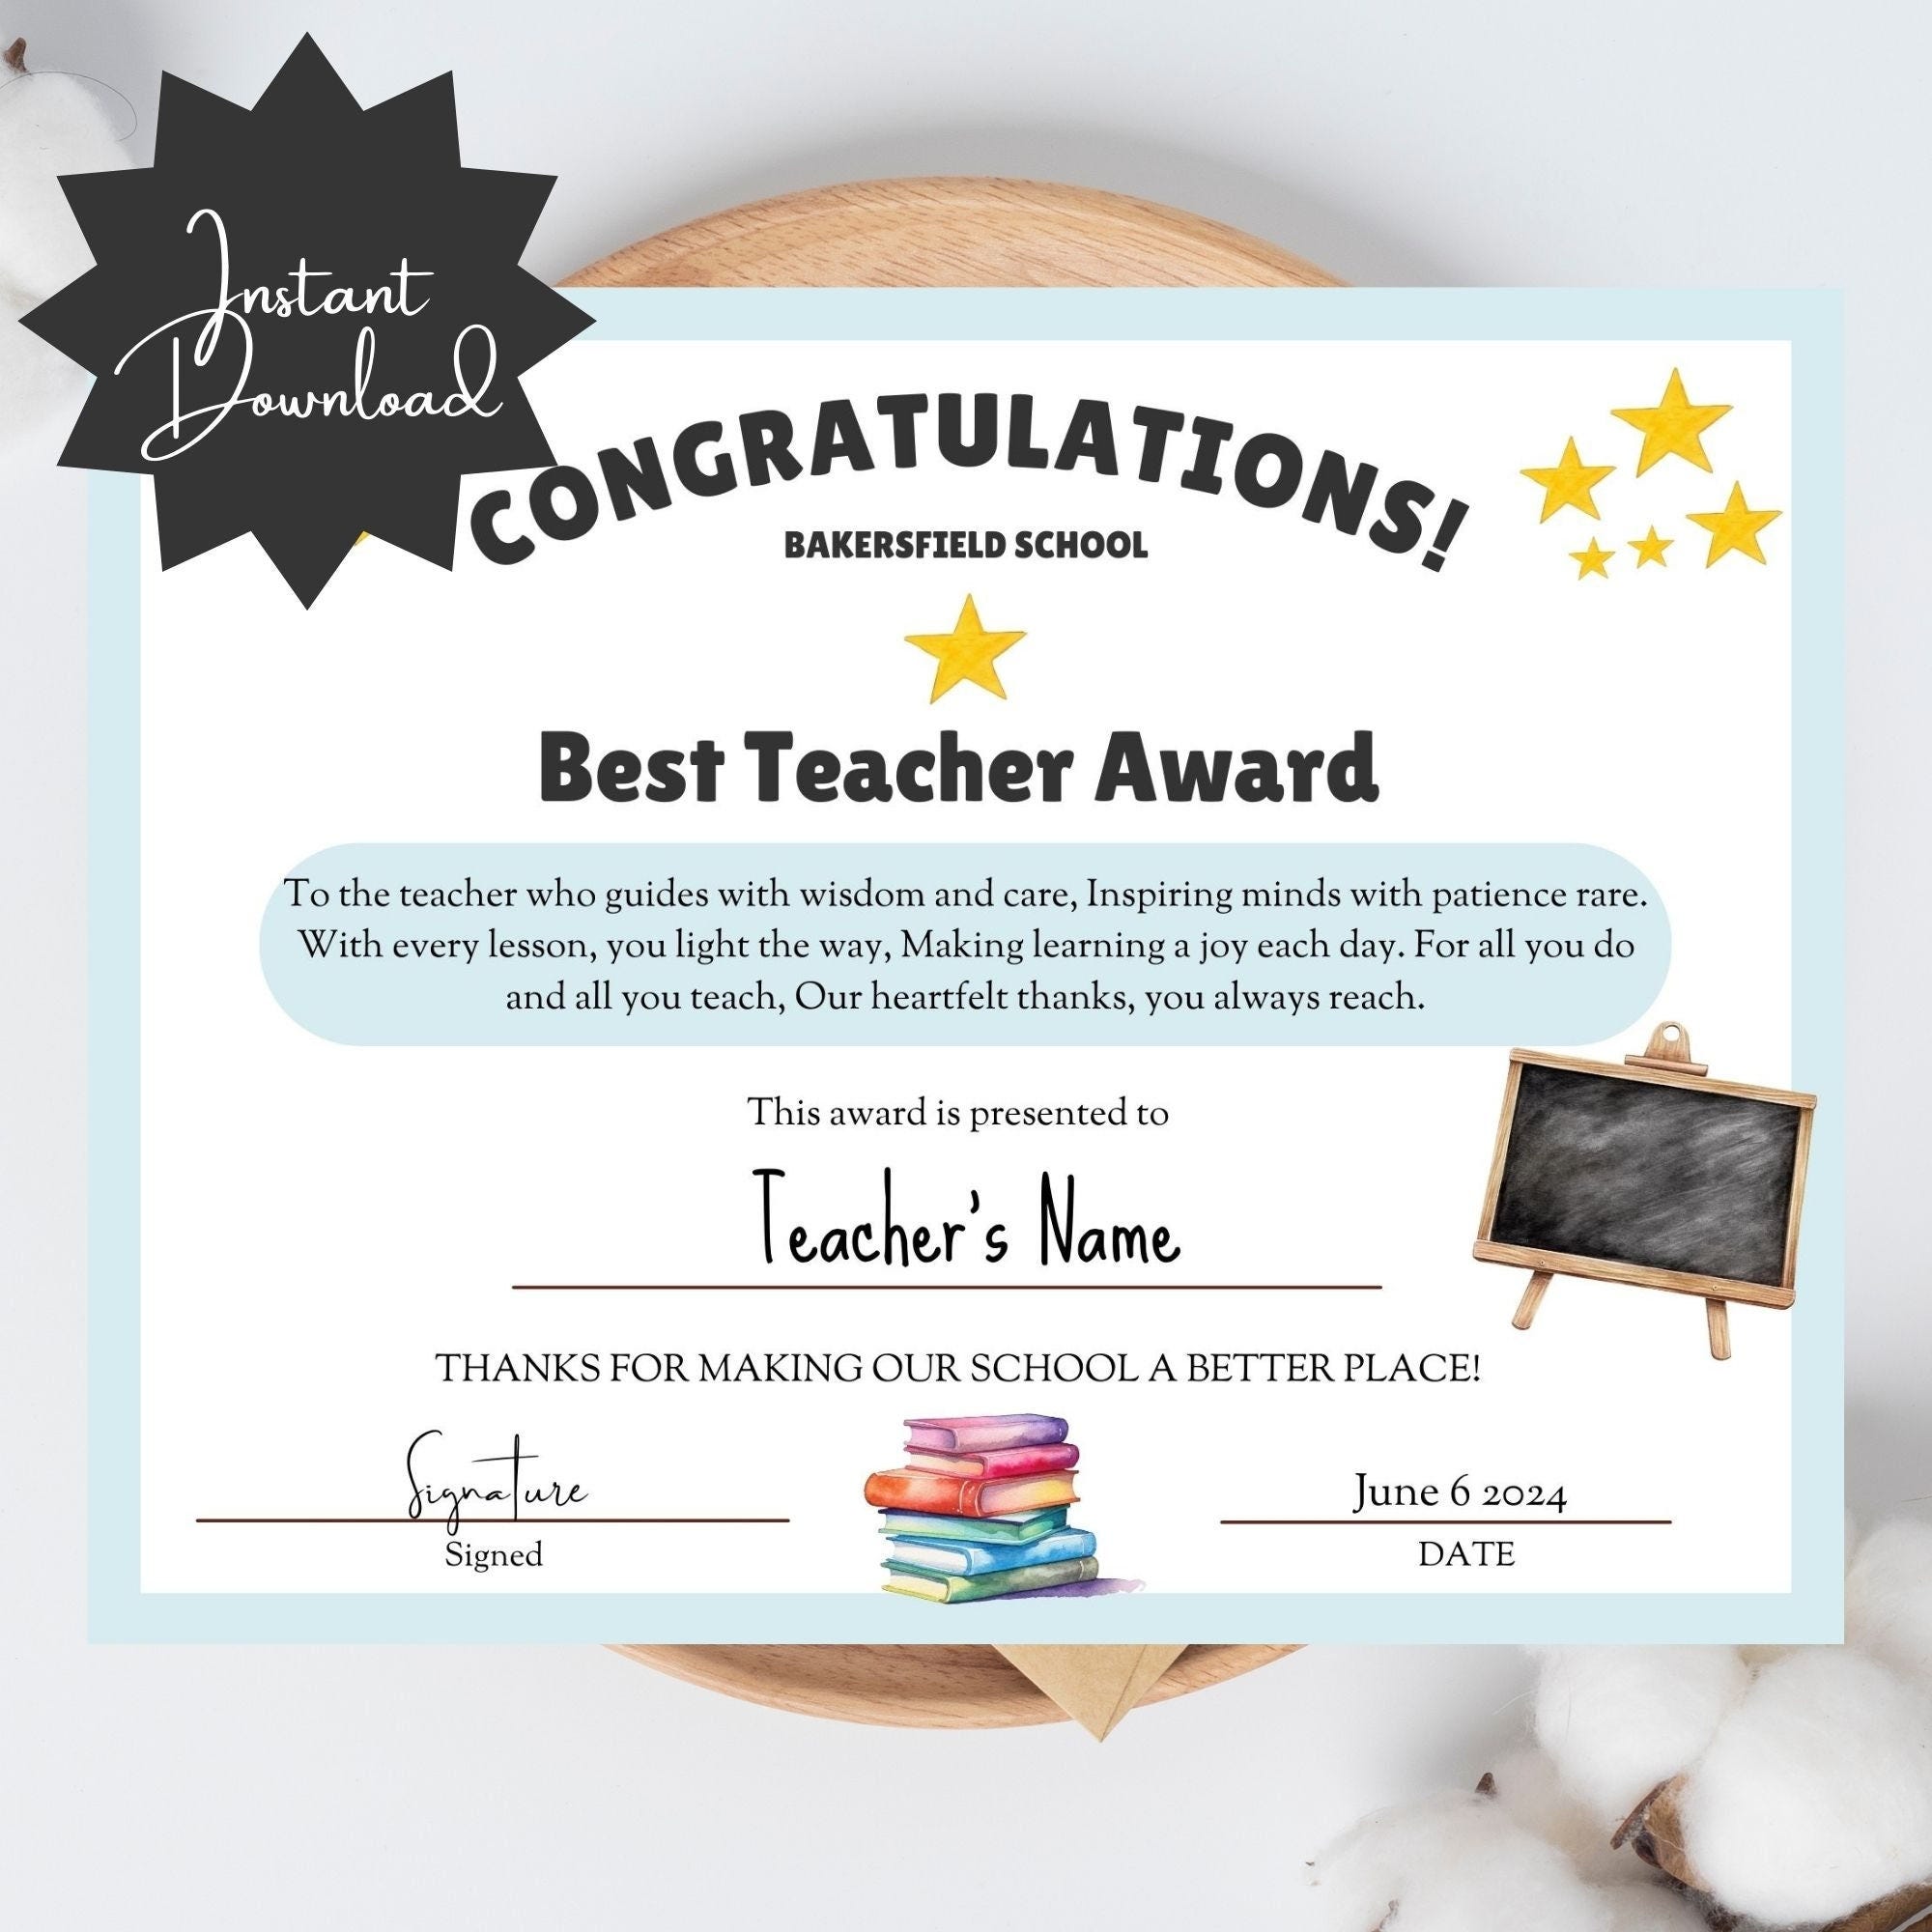 Best Teacher Award Certificate, End Of School Year Appreciation, Gift from Students, Editable Canva Template, Diploma, Thank You Card